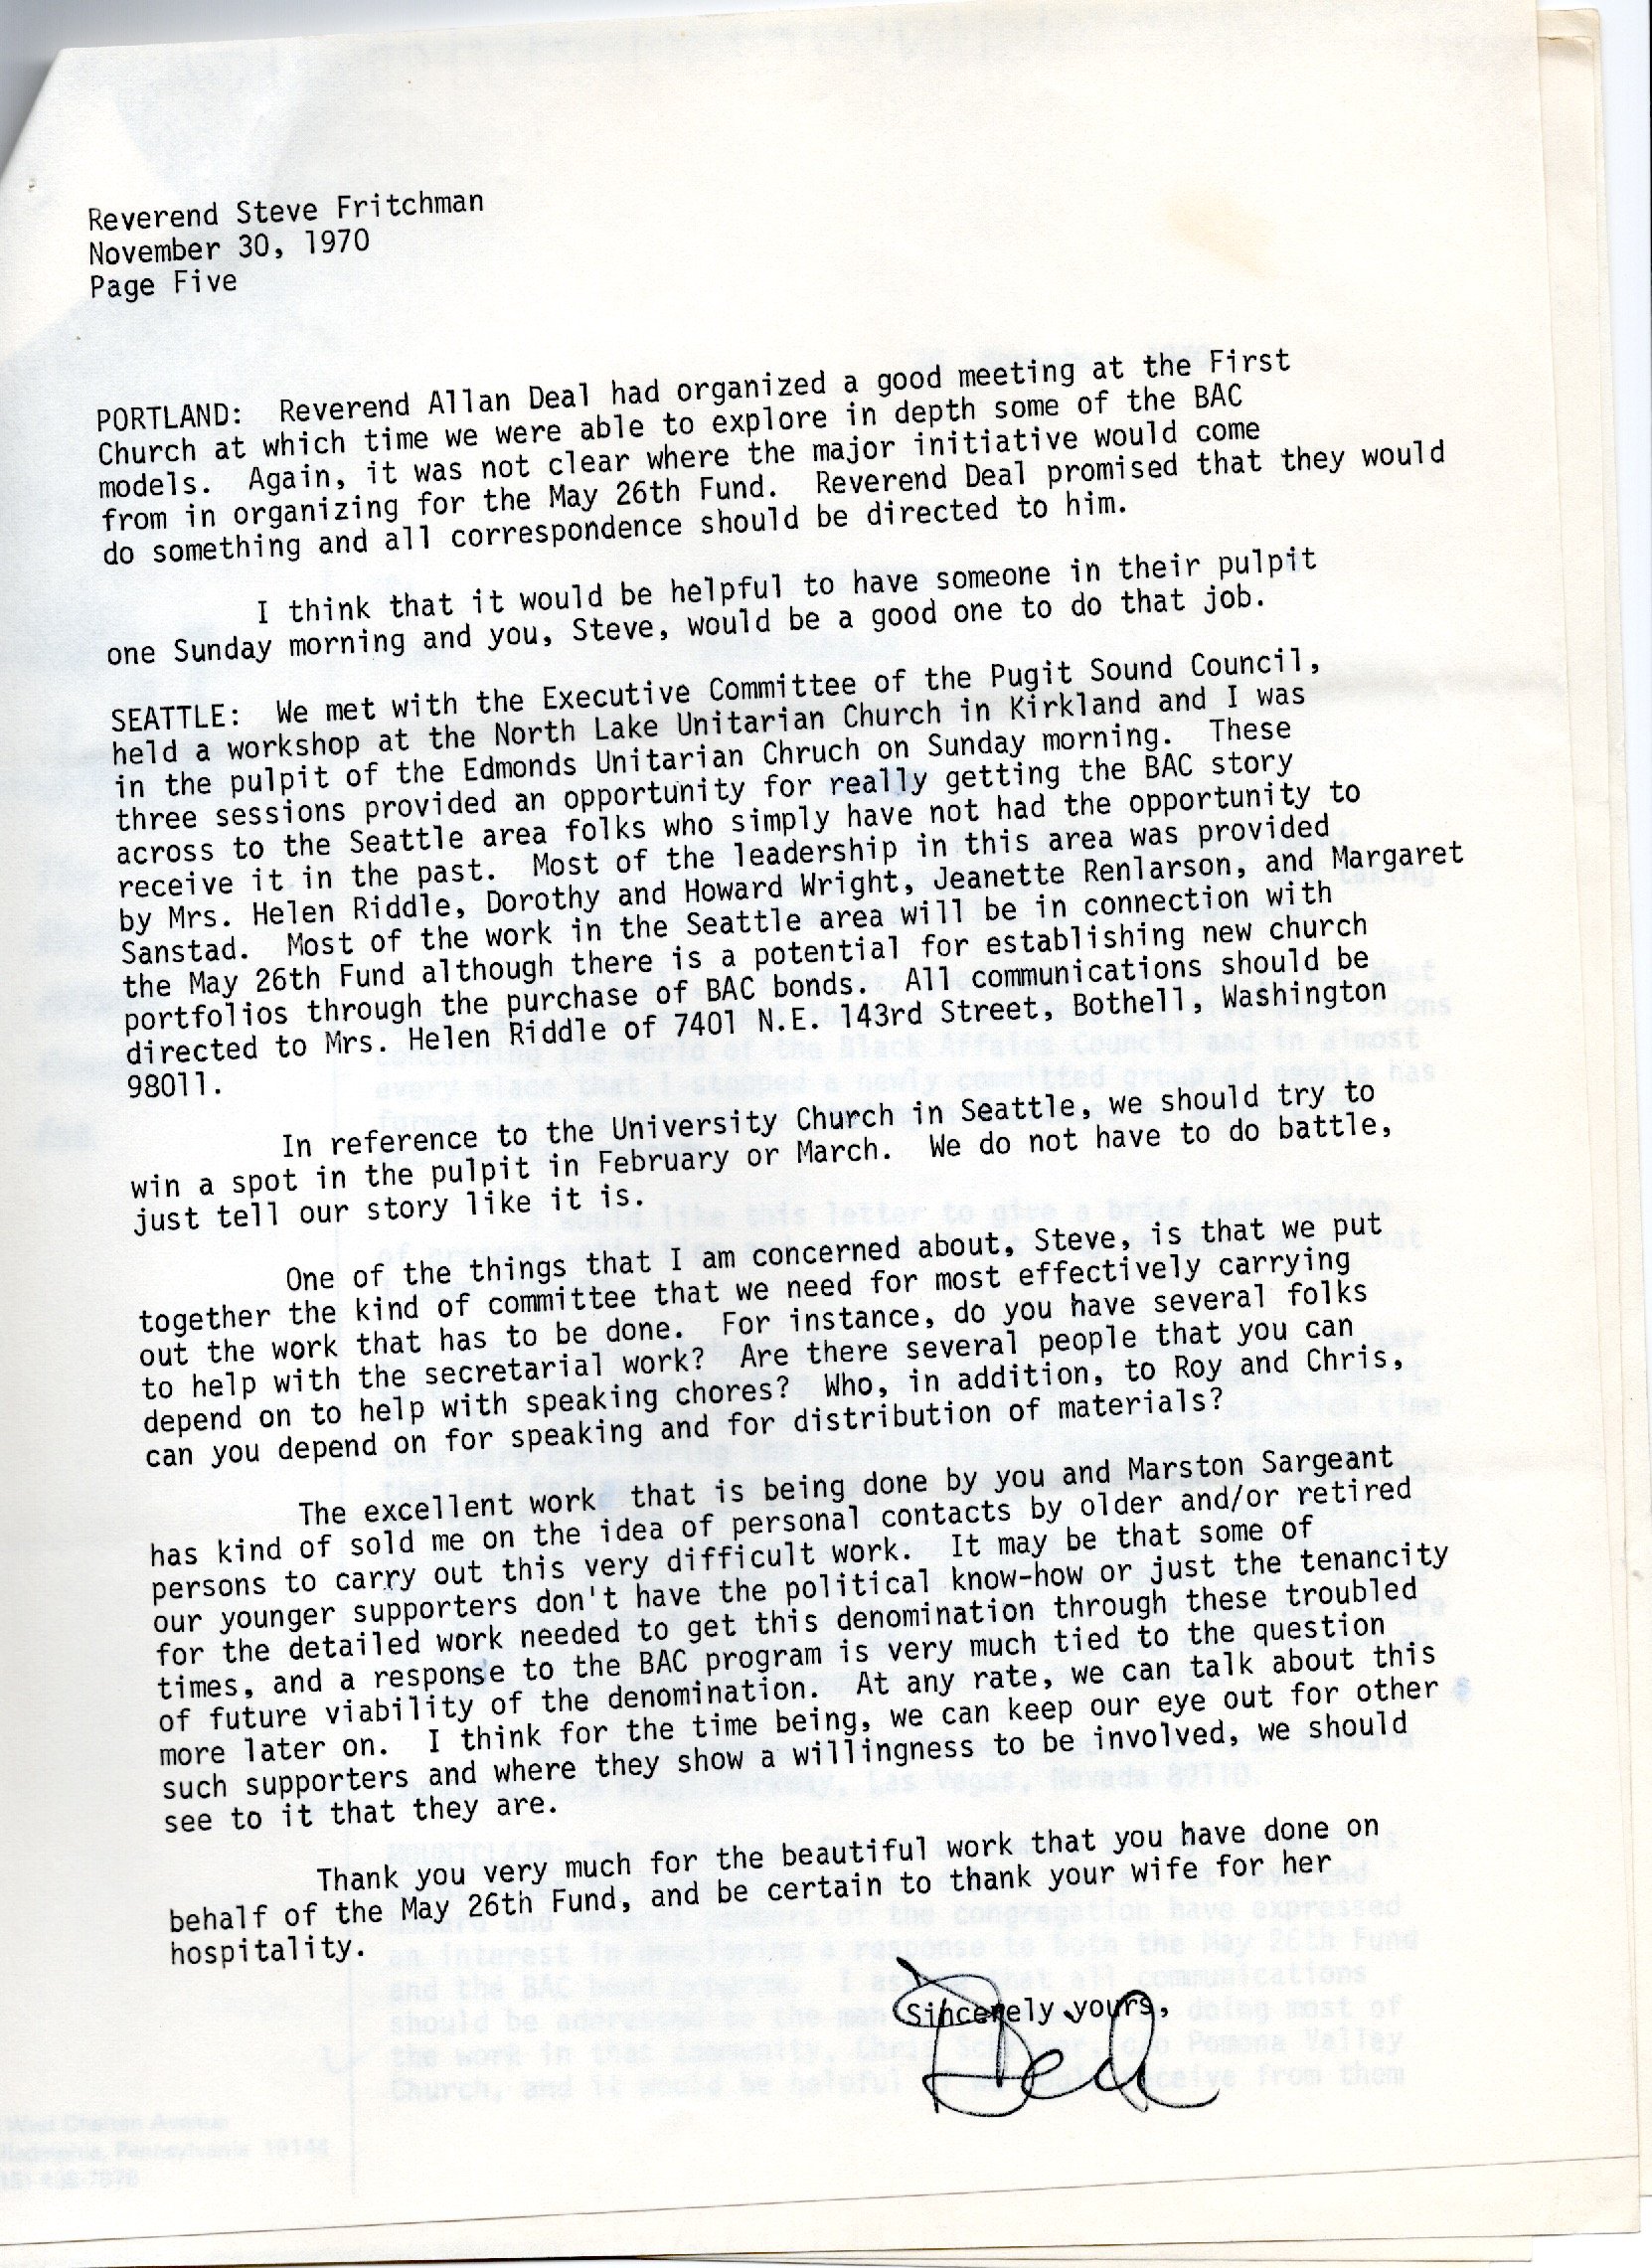 1970.11.30 memo from Dick Traylor to Fritchman_0005.jpg